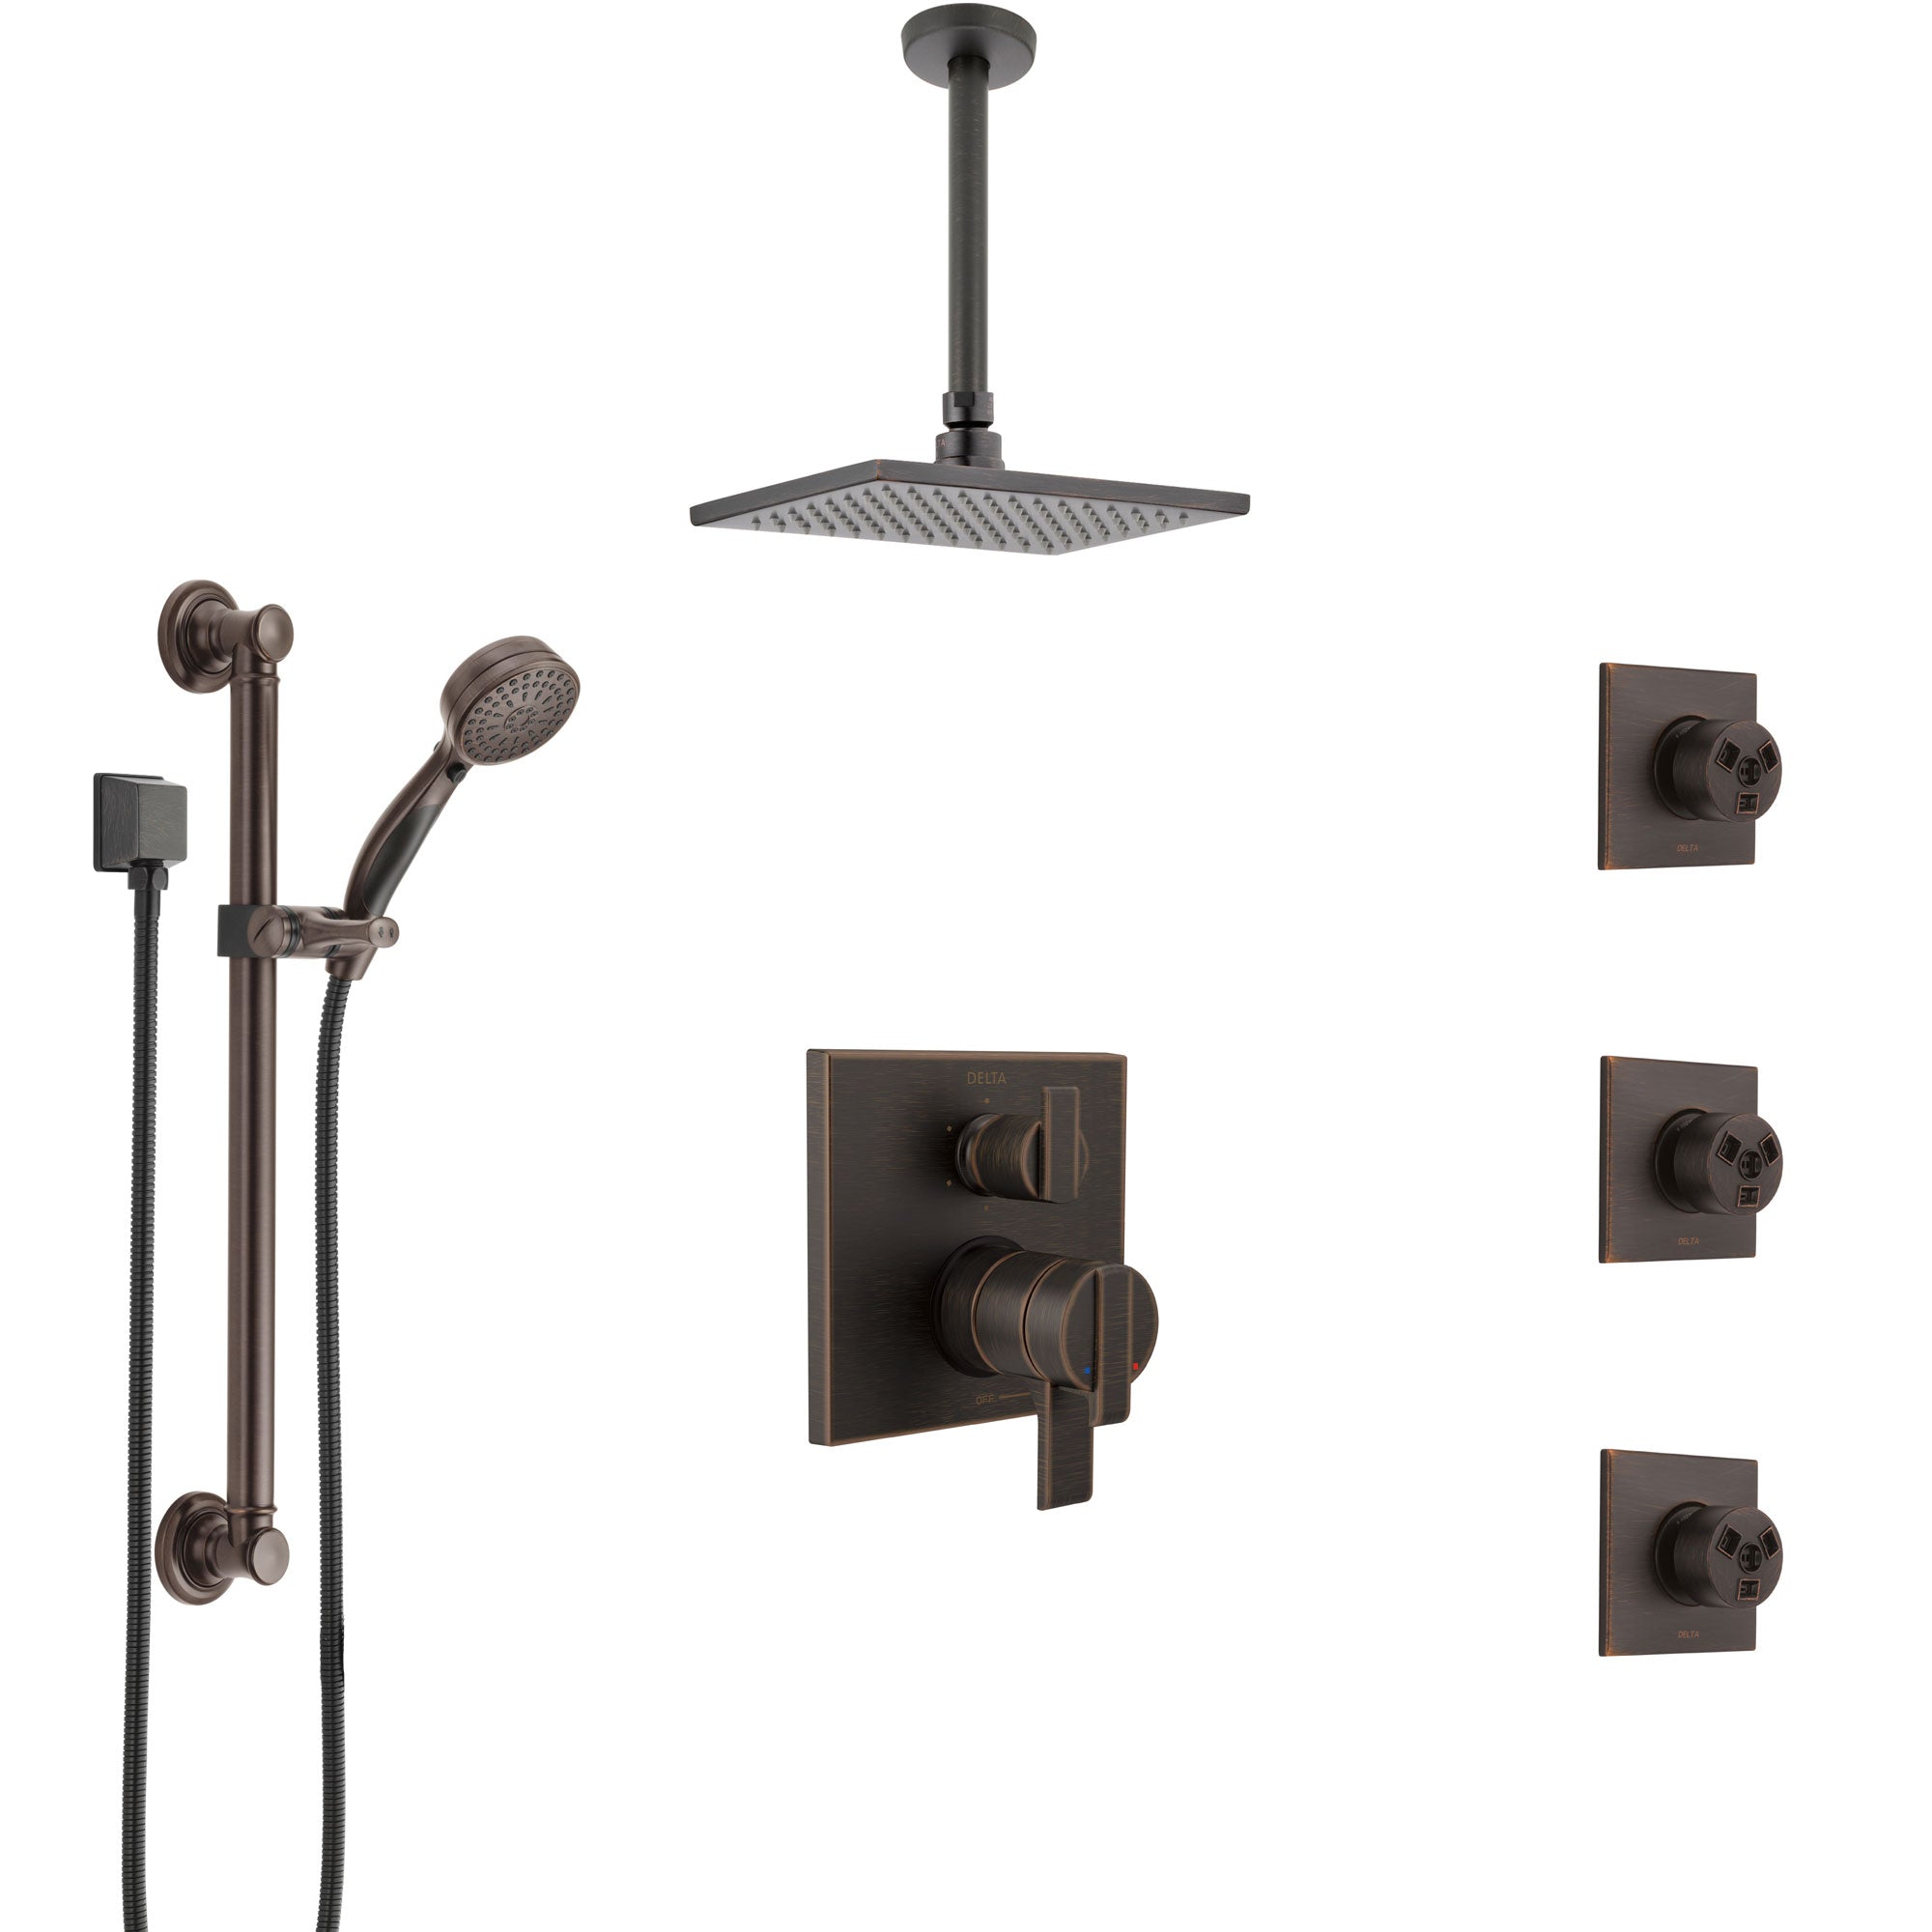 Delta Ara Venetian Bronze Shower System with Dual Control Handle, Integrated Diverter, Ceiling Showerhead, 3 Body Jets, Grab Bar Hand Spray SS27967RB2